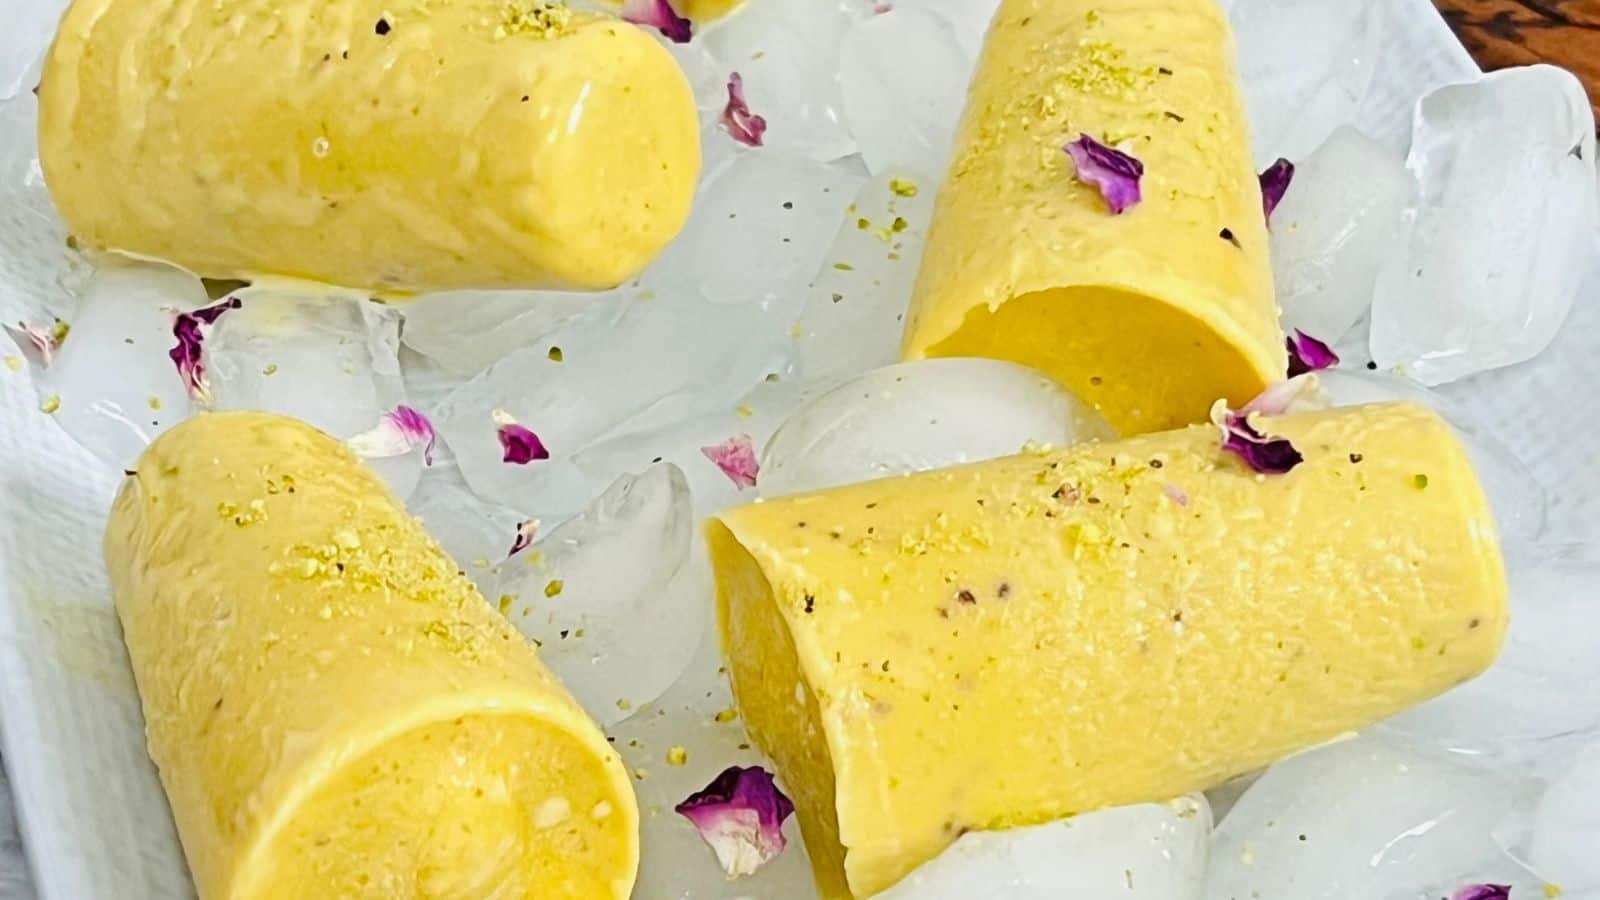 Mango kulfi placed on a black plate on a bed of ice.